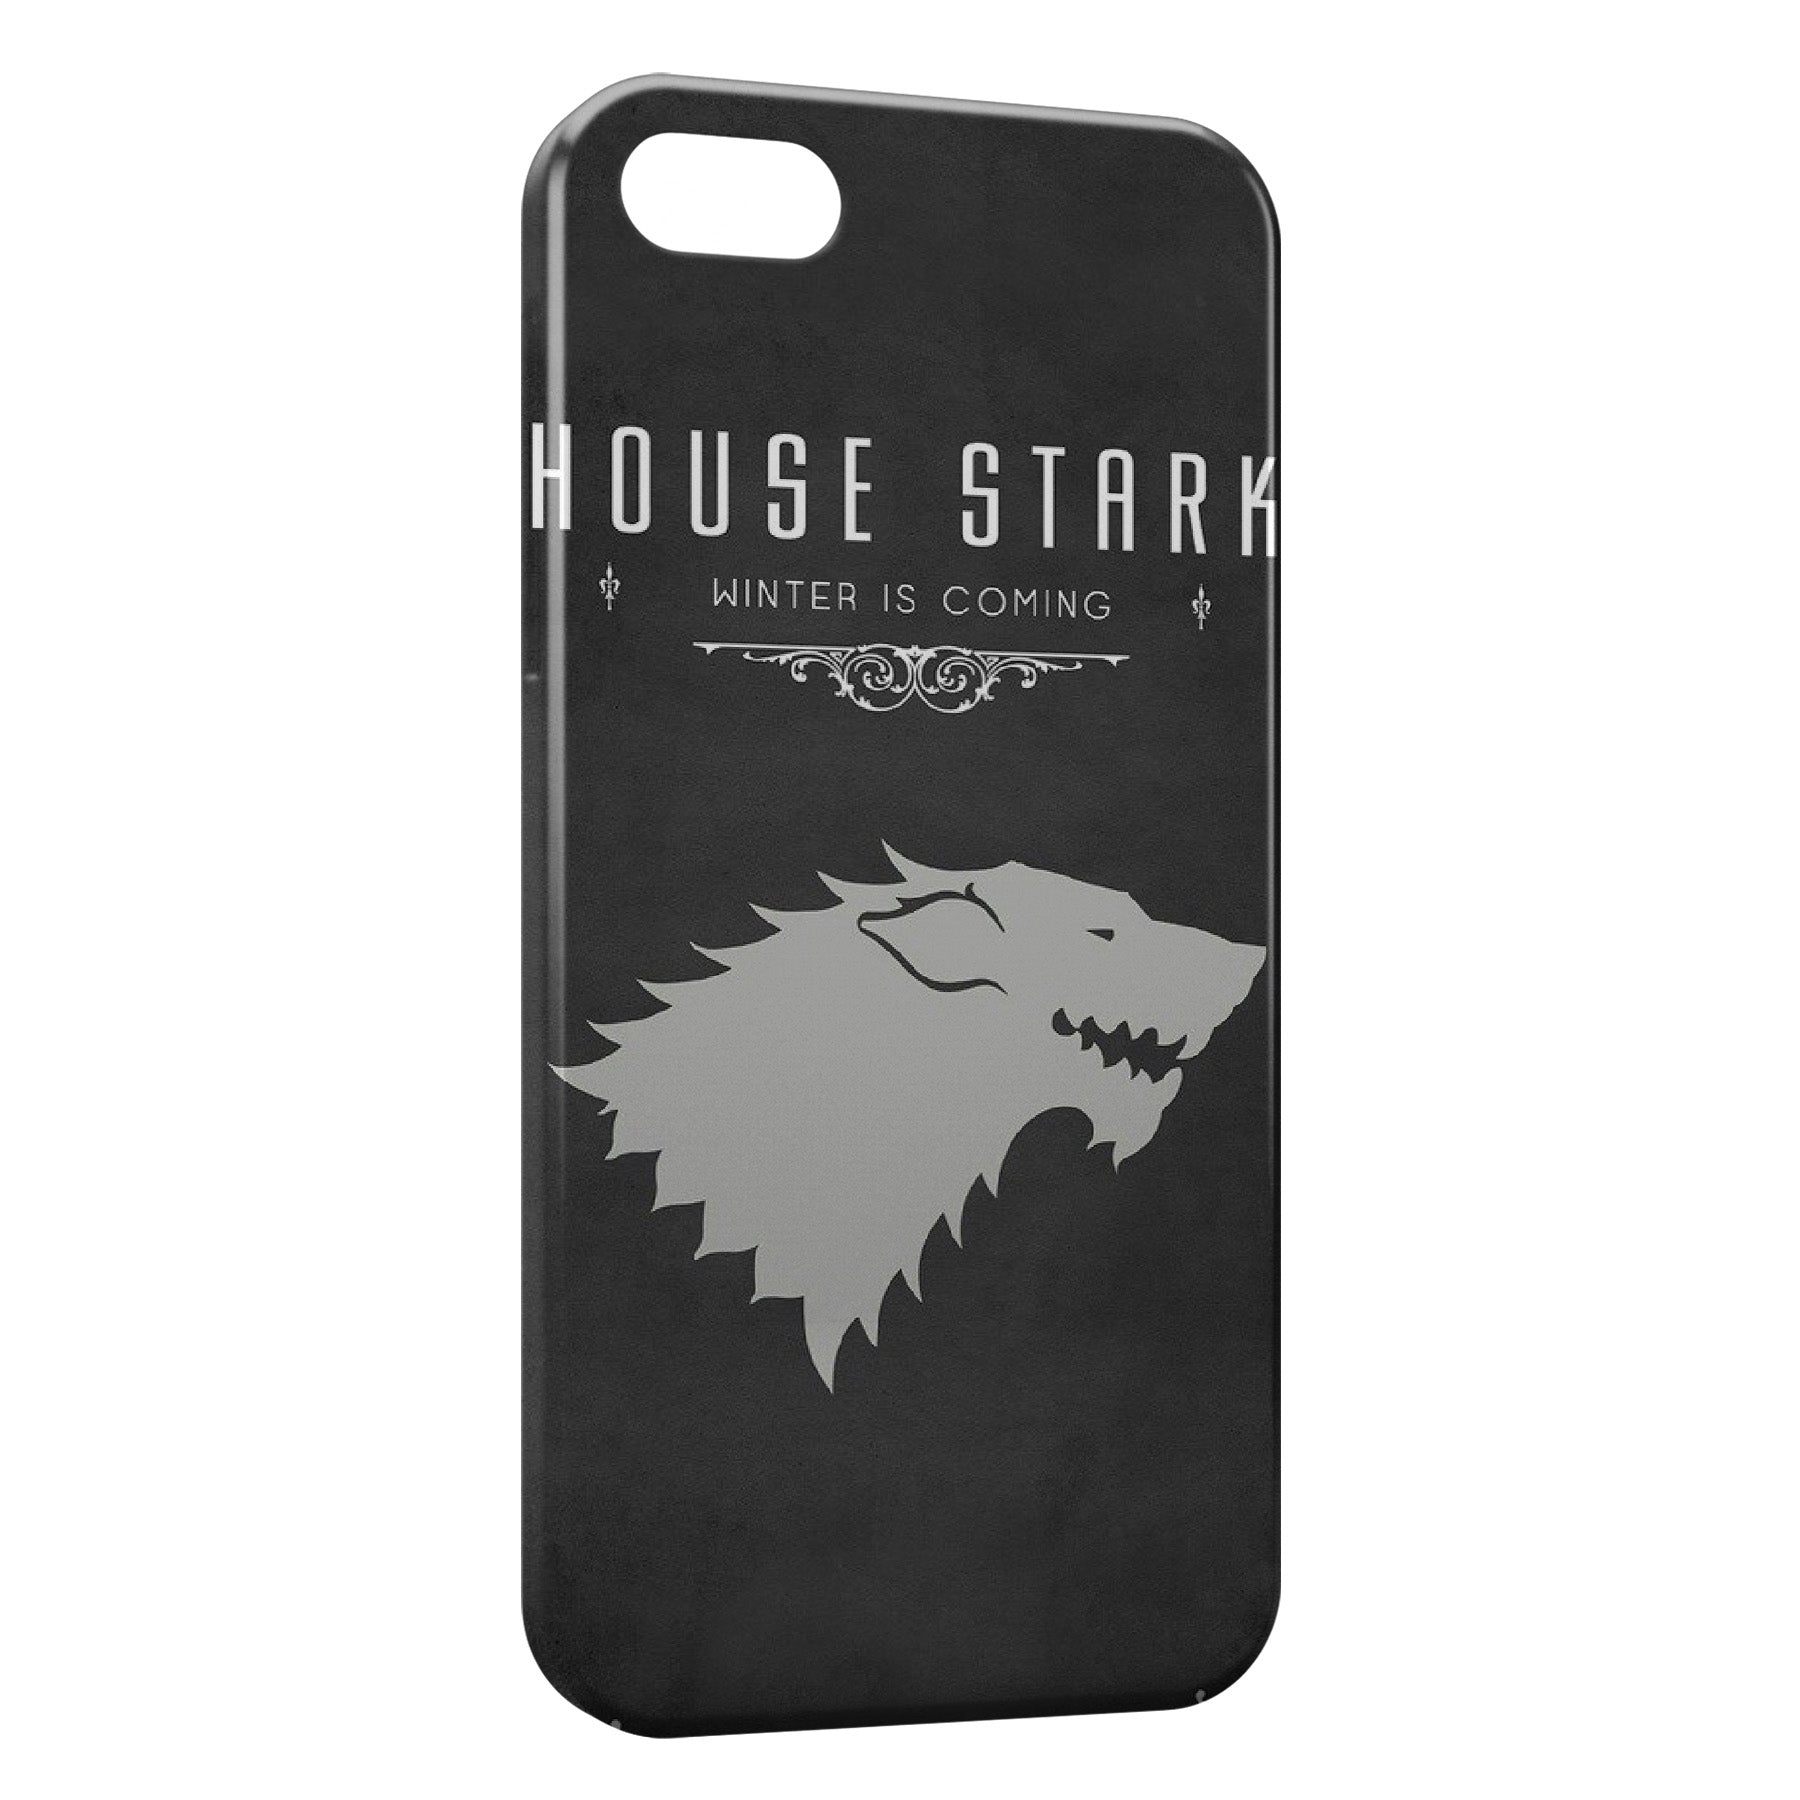 coque iphone 8 winter is coming